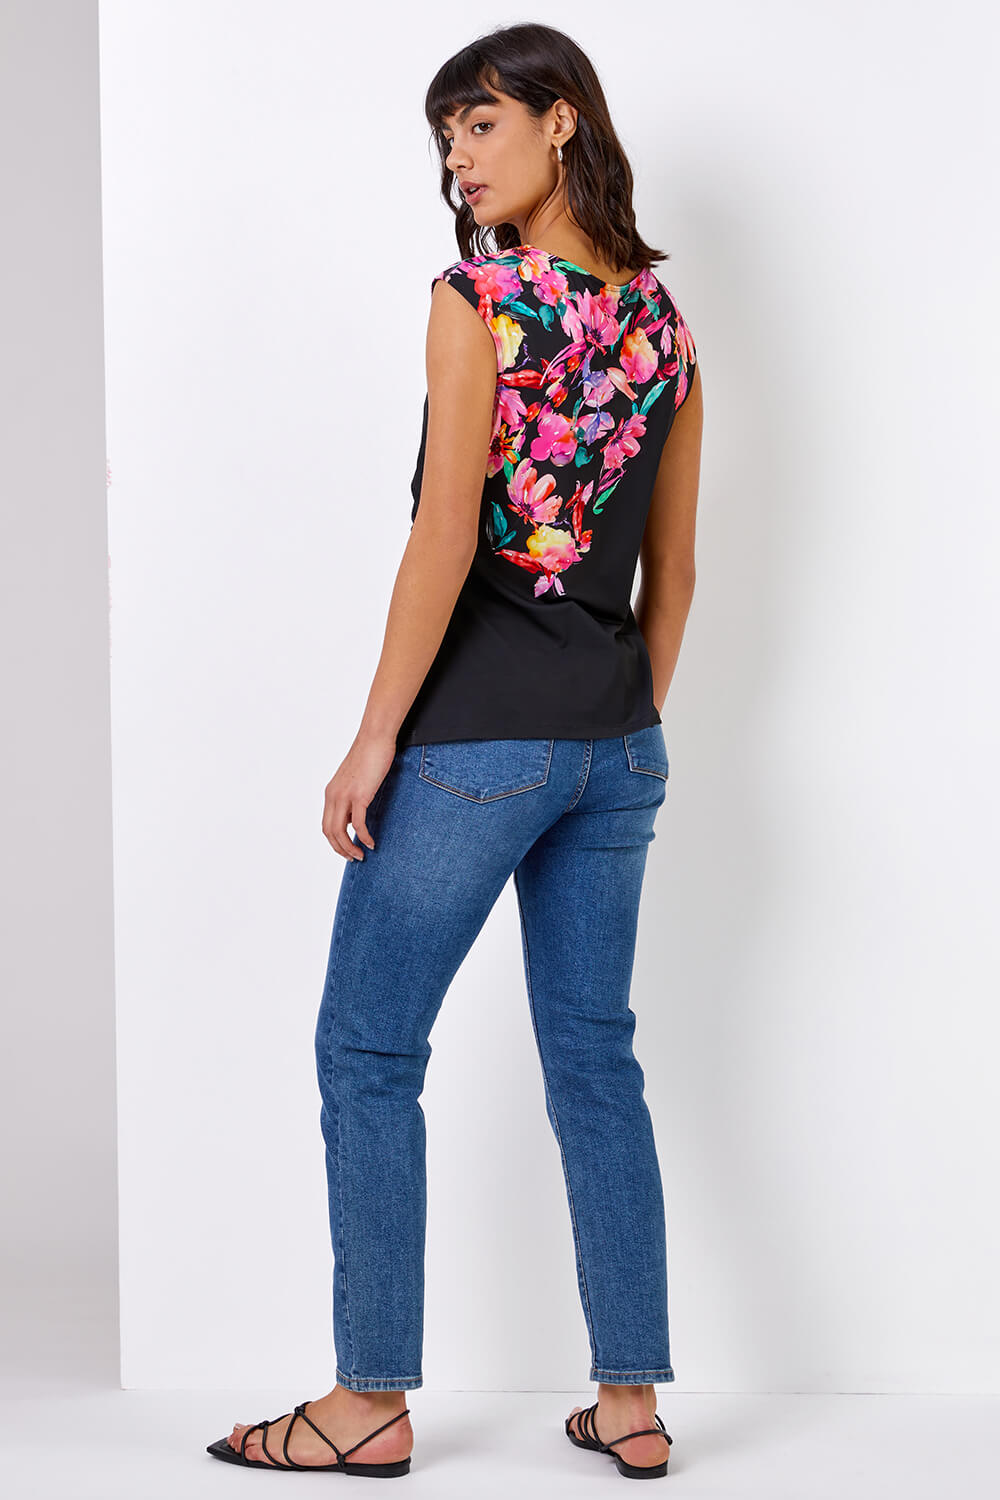 Black Floral Border Print Luxe Stretch Top, Image 3 of 4